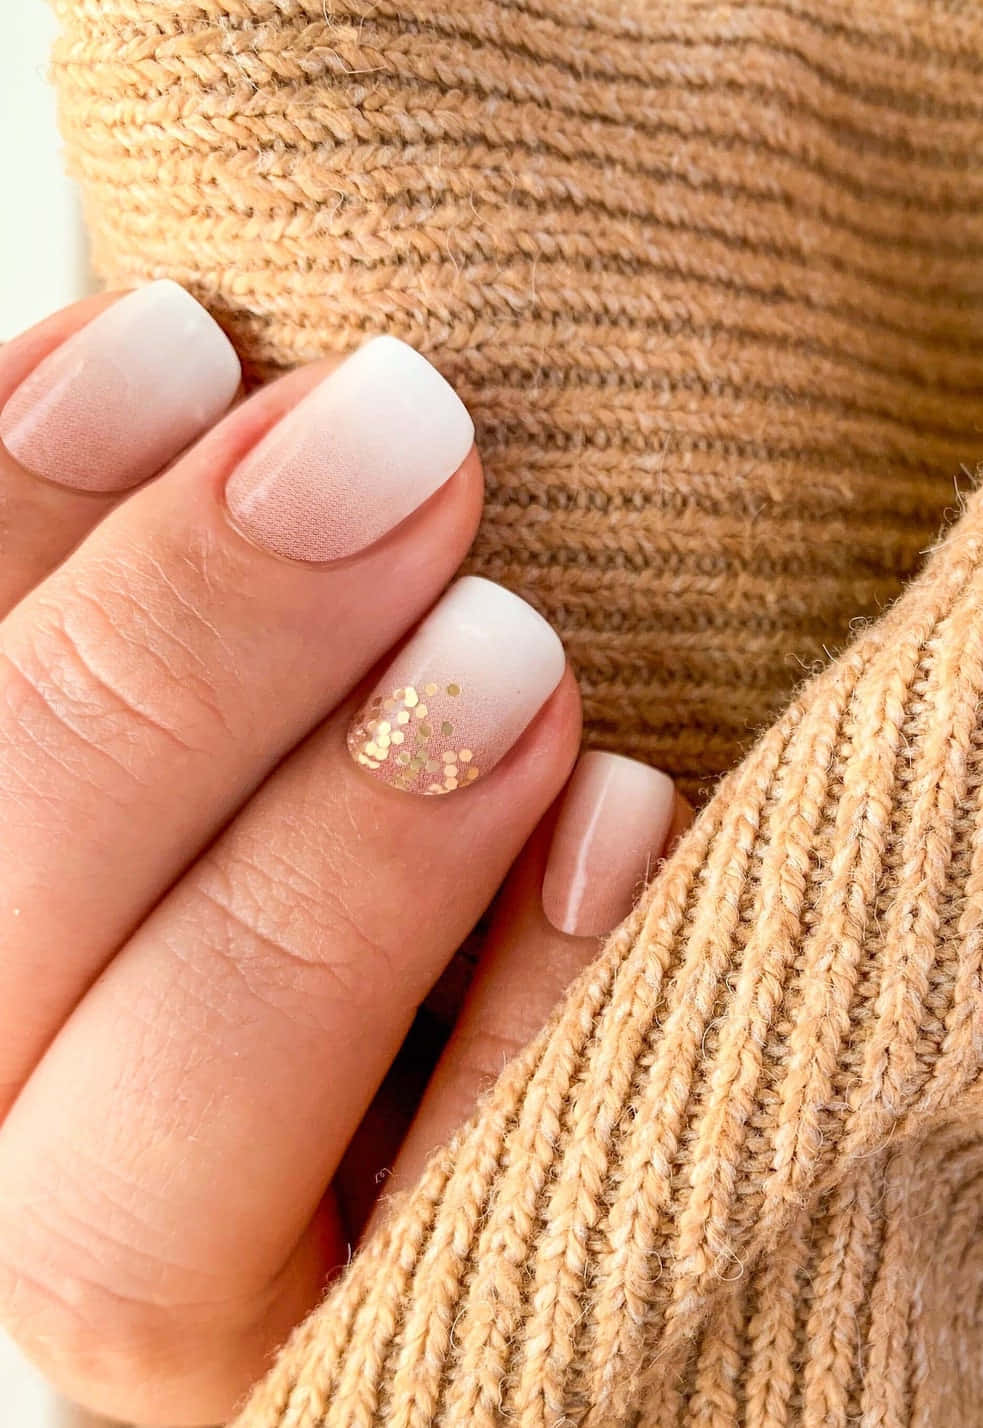 40+ Gorgeous White And Gold Nails To Copy This Month